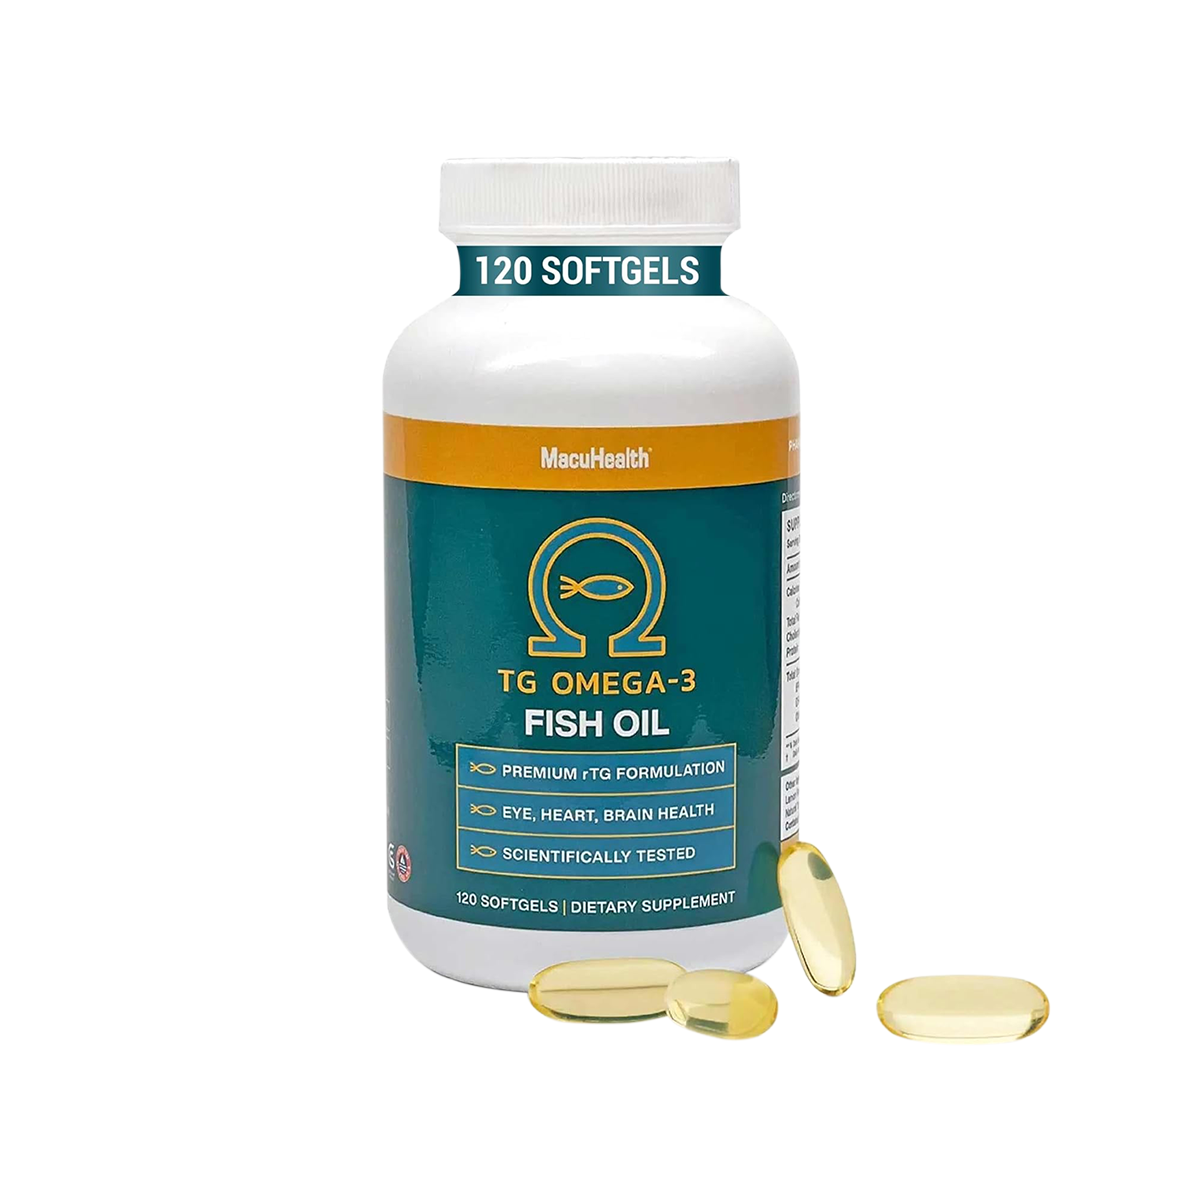 MacuHealth Omega 3 Fish Oil for support for dry eyes - 1100mg of Omega 3, 120 Softgels